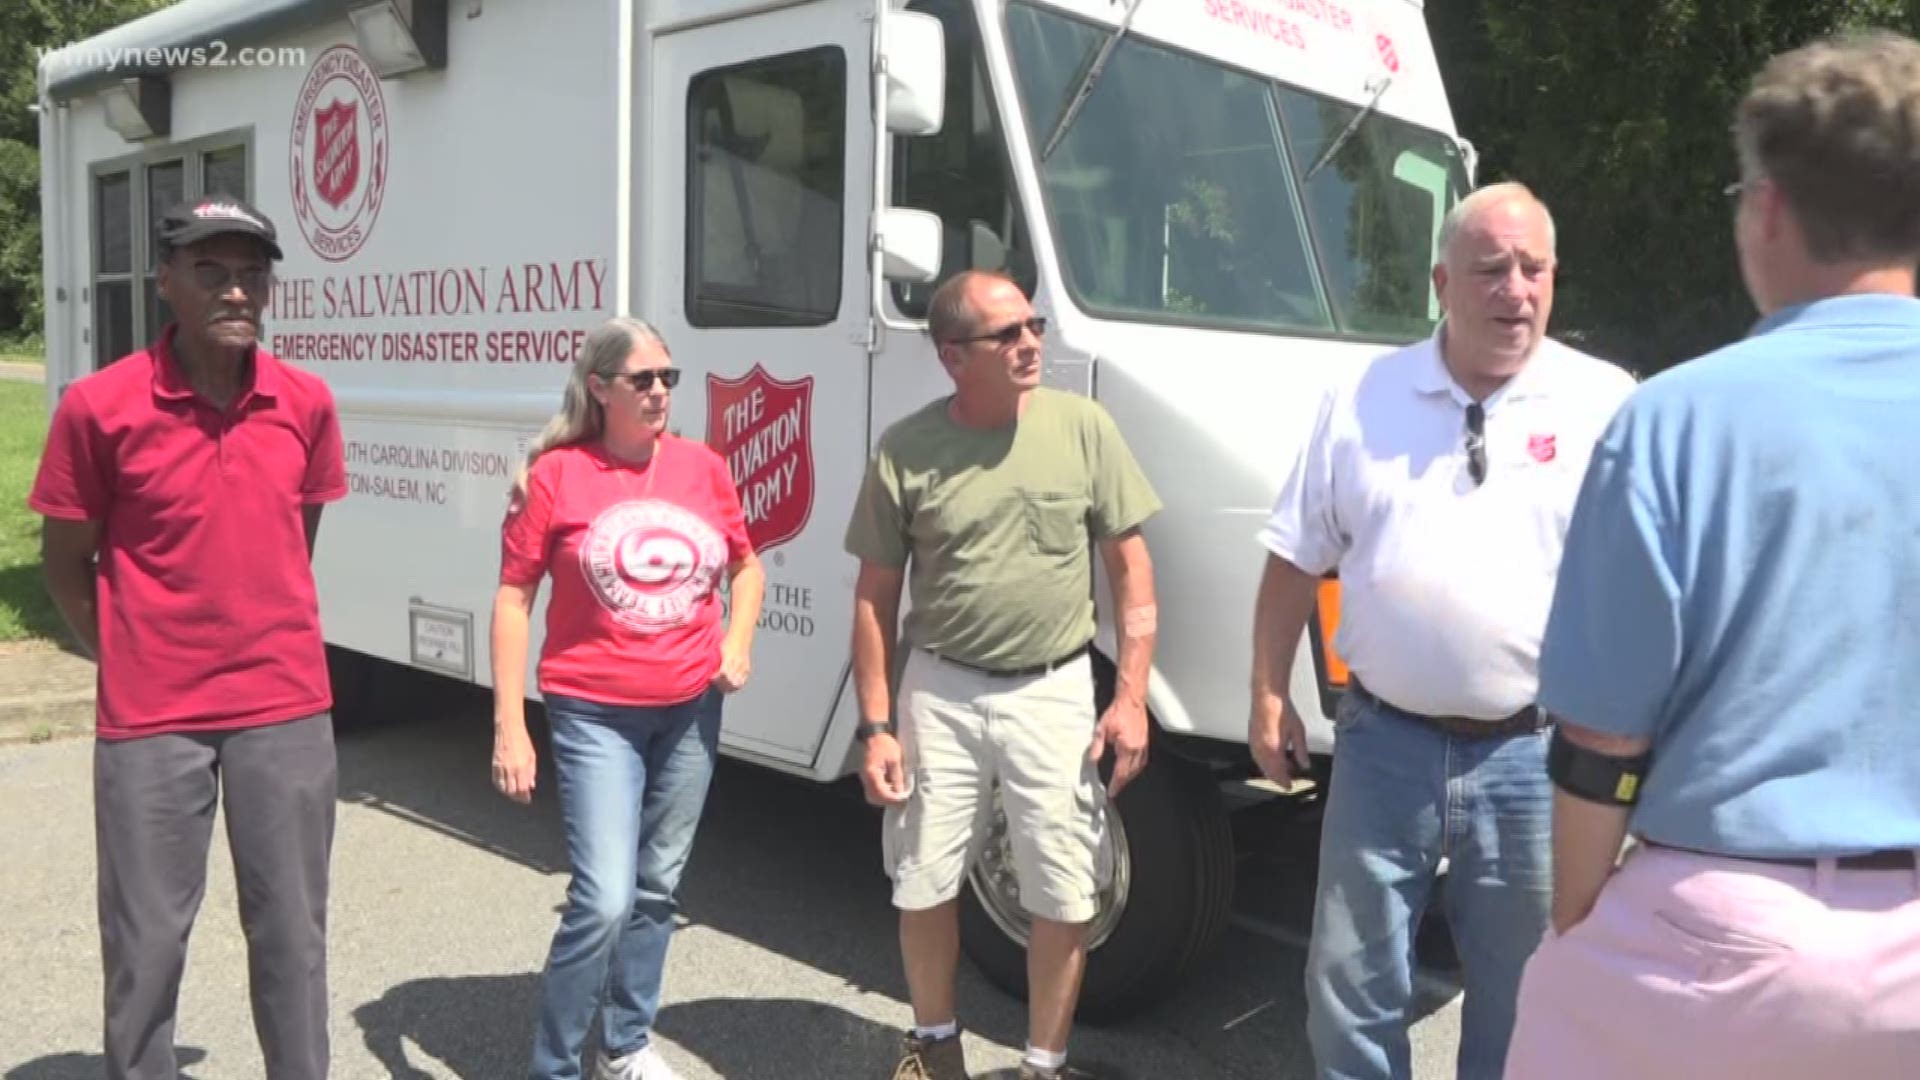 The Salvation Army of Greater Winston-Salem and The Salvation Army of Greensboro are deploying to Charleston, SC. in advance of Hurricane Dorian. The storm is on track to cuase problems along the Carolinas coastline. An Emergency Disaster Services team from Greensboro will take the Winston-Salem Mobile Feeding Unit, stock with food and water, to aid first responders.